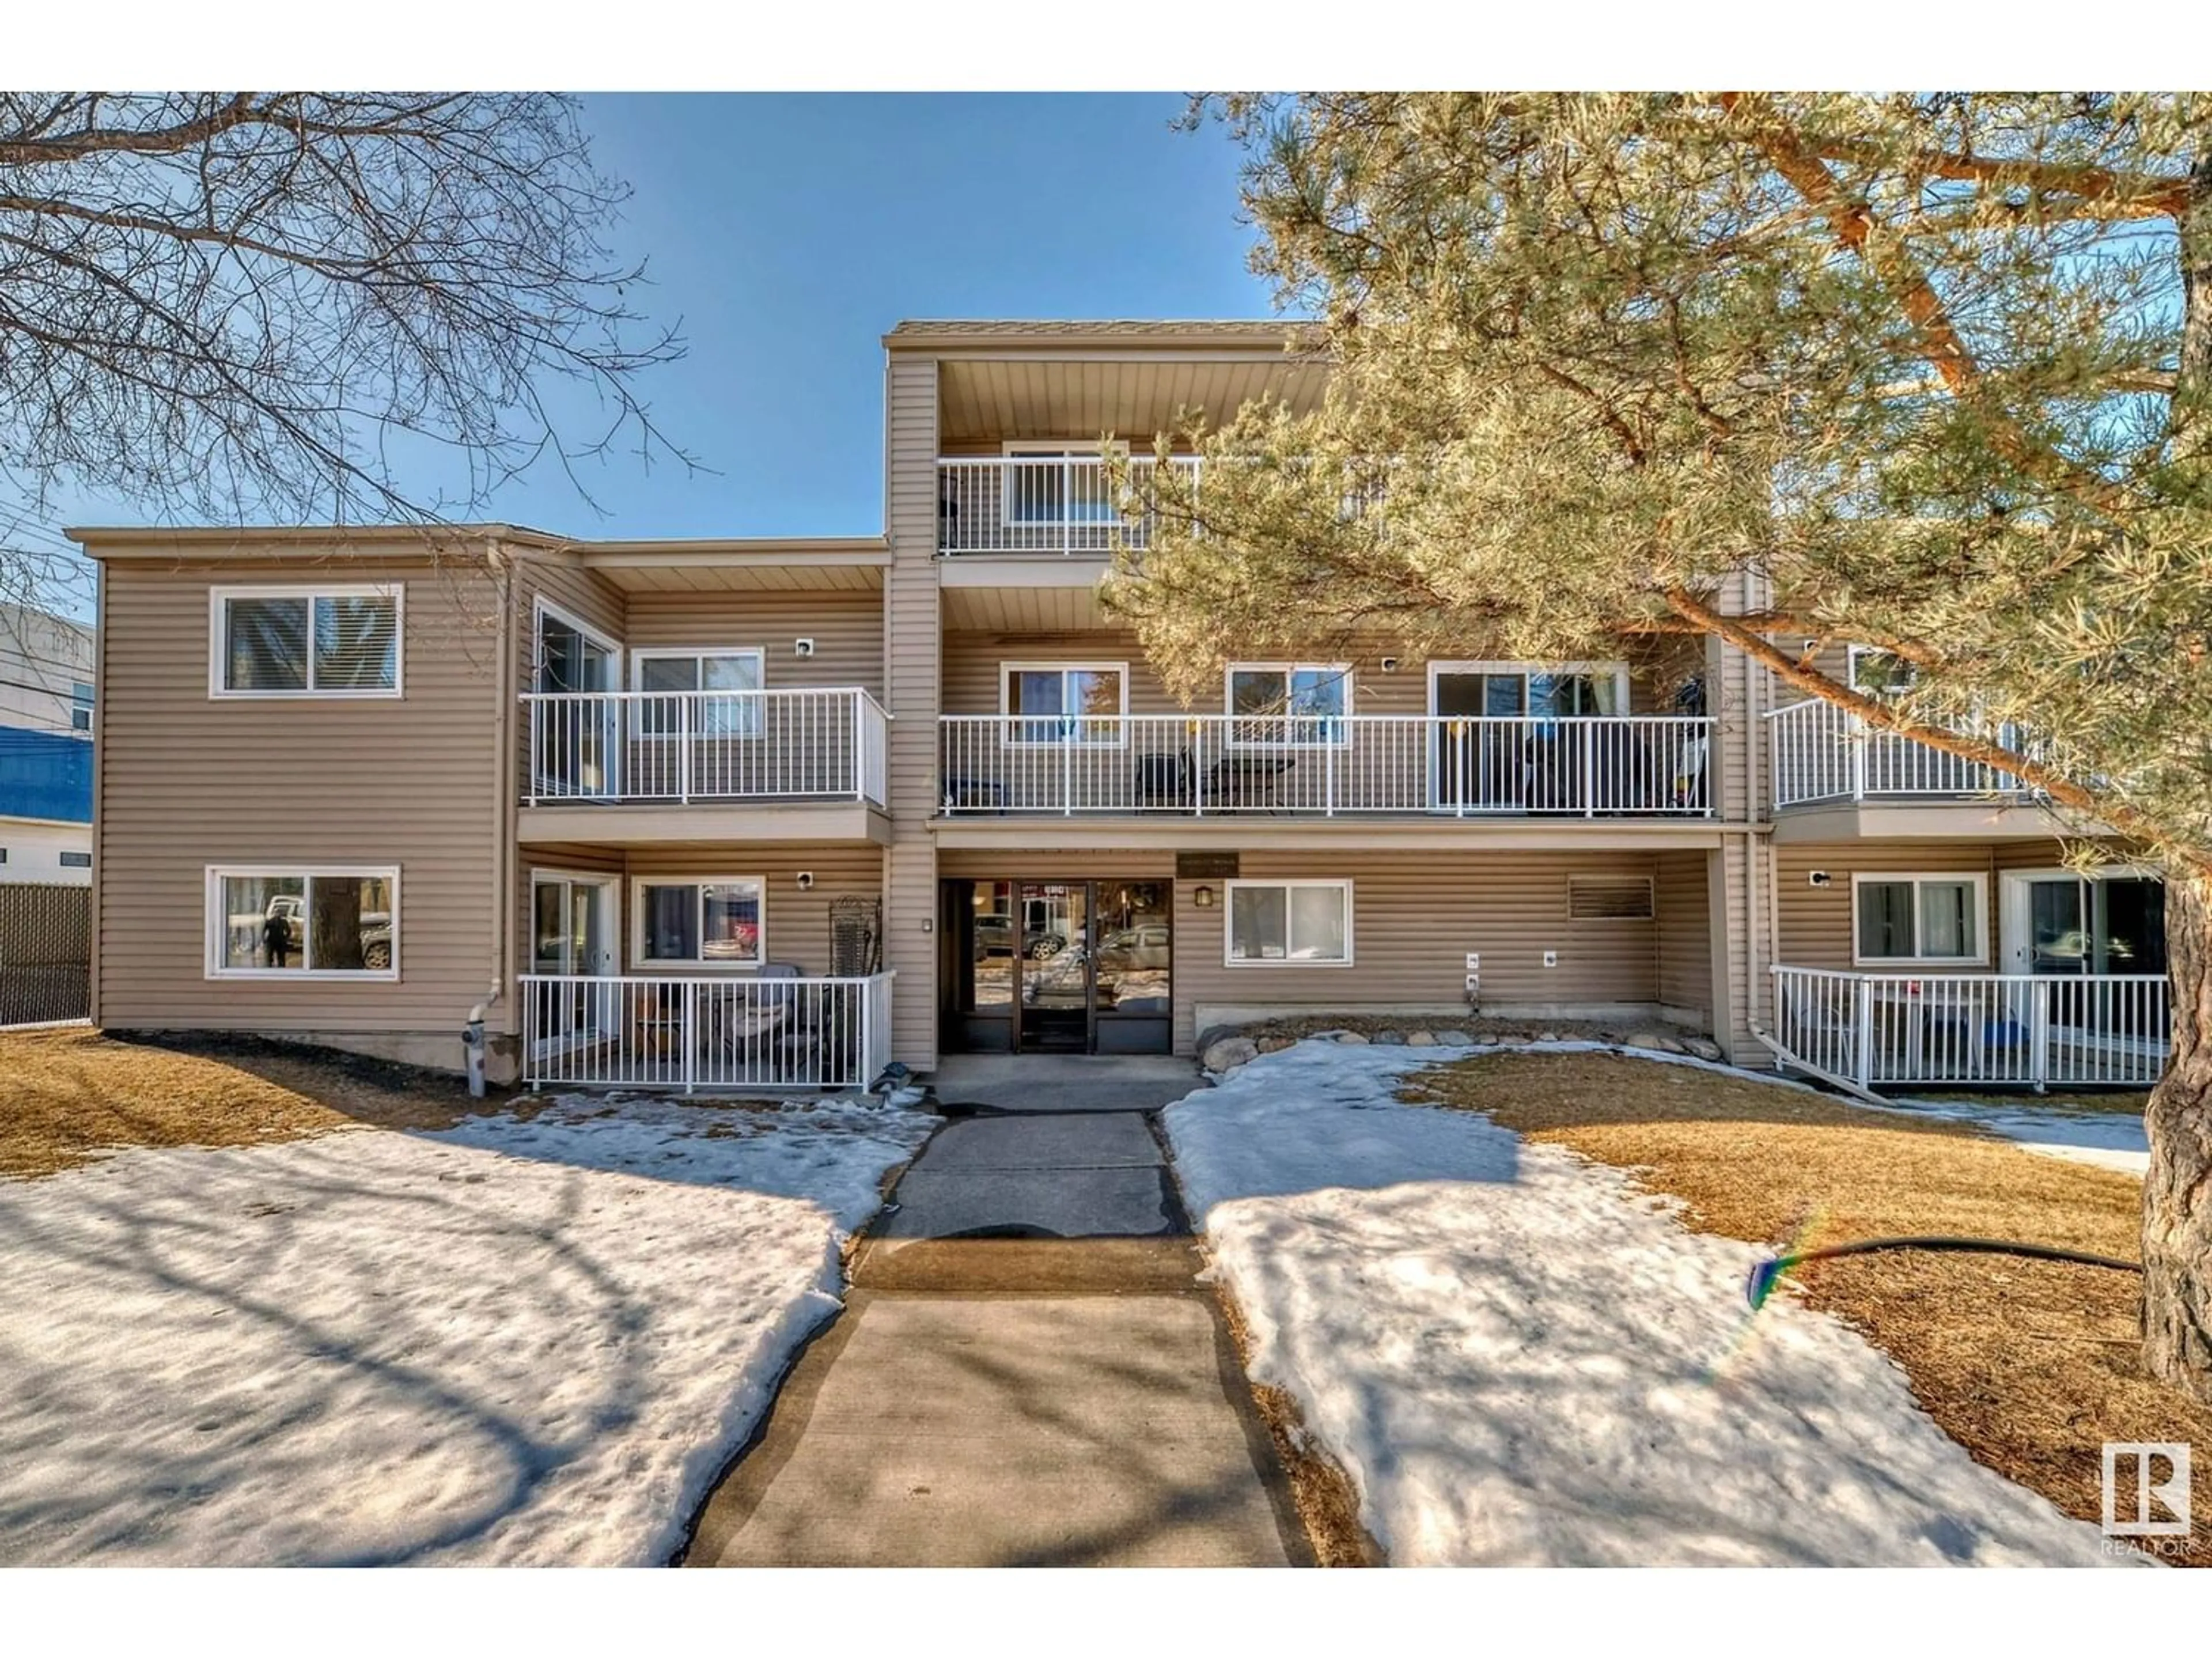 A pic from exterior of the house or condo for #104 10124 159 ST NW, Edmonton Alberta T5P3A1